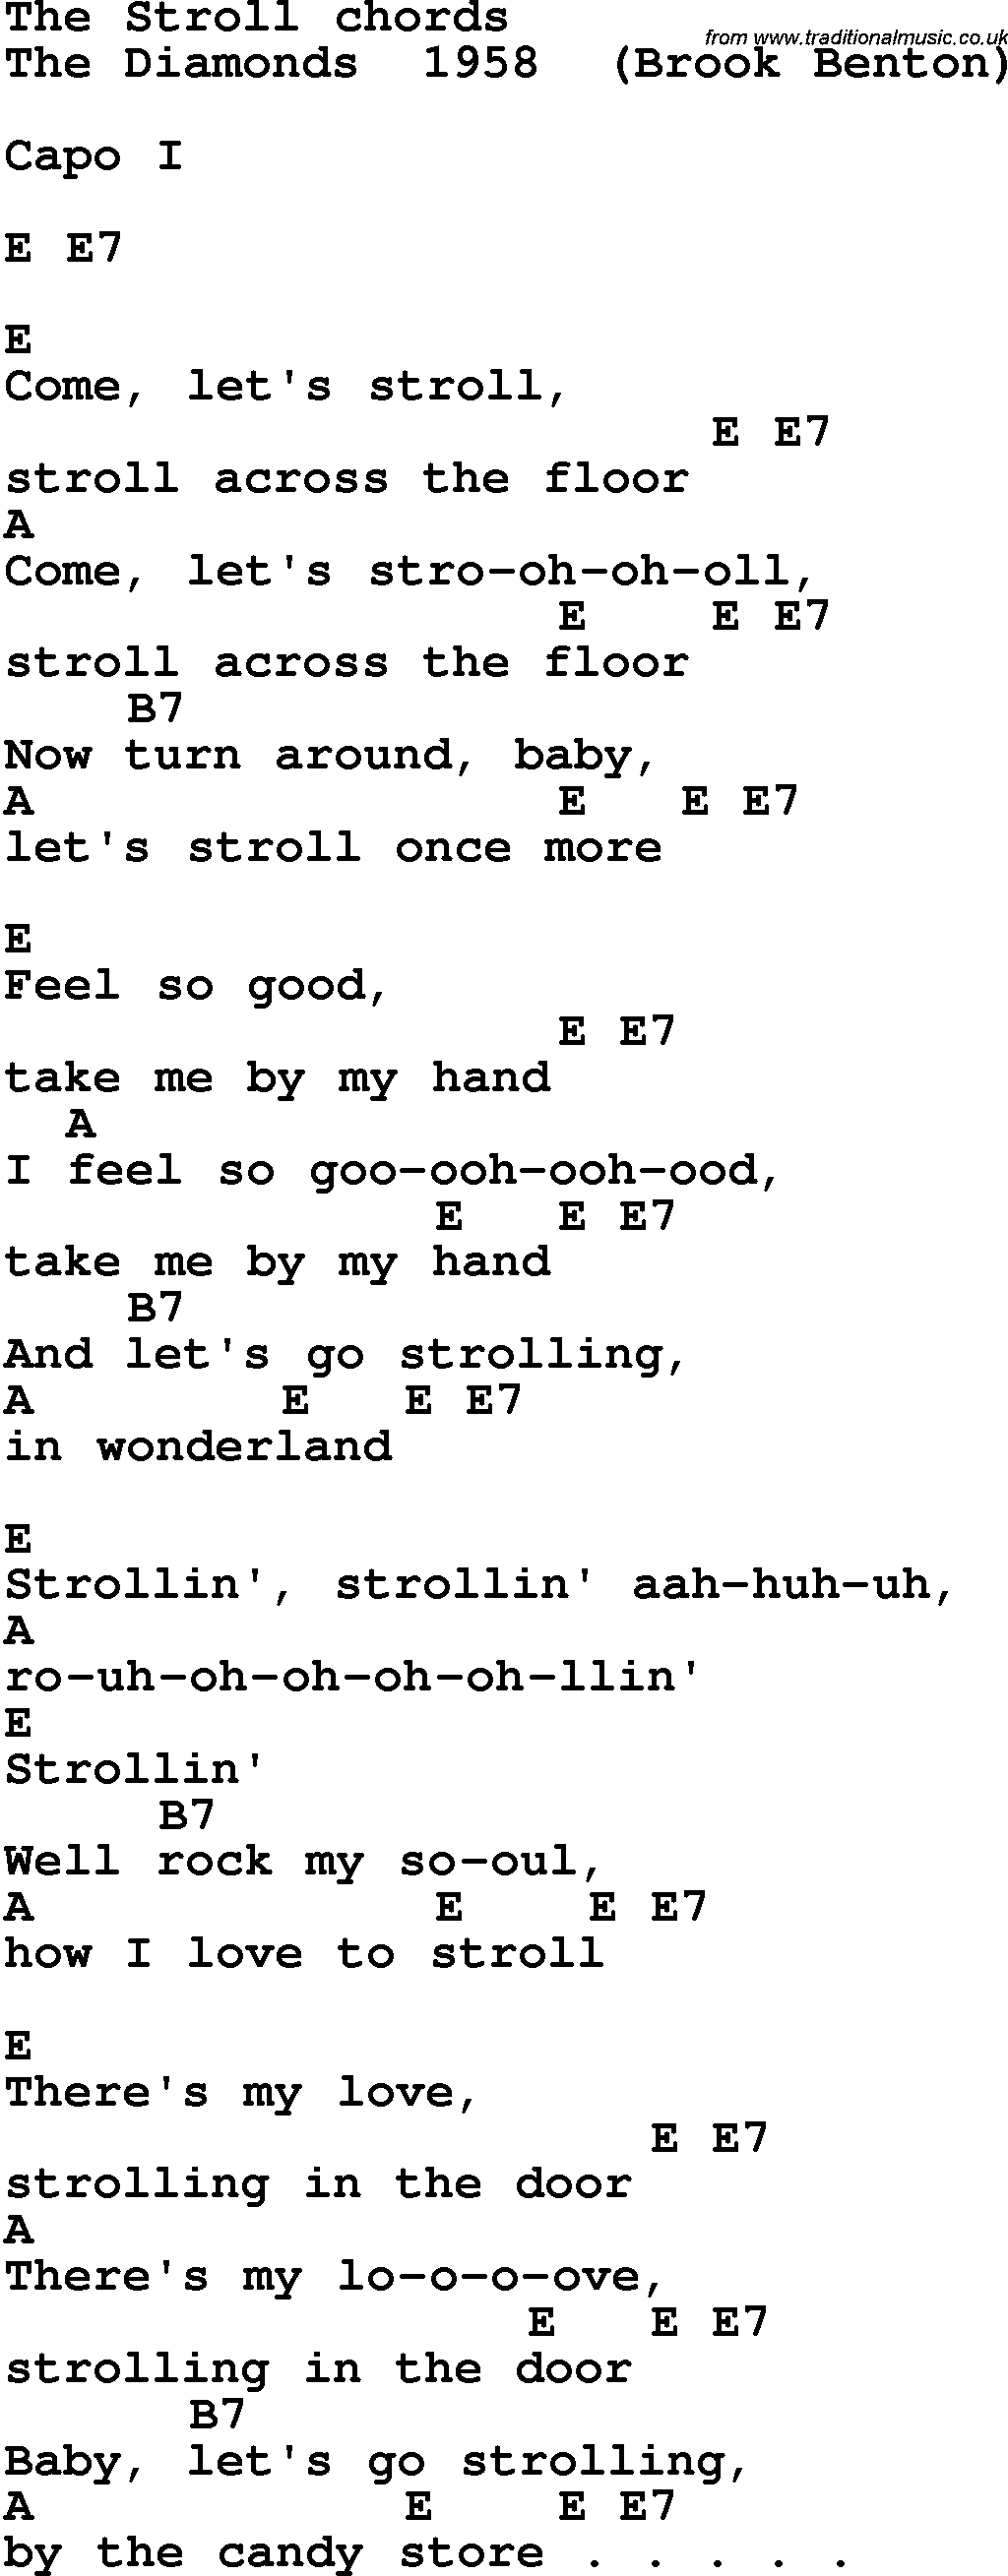 Song Lyrics with guitar chords for The Stroll - The Diamonds 1958